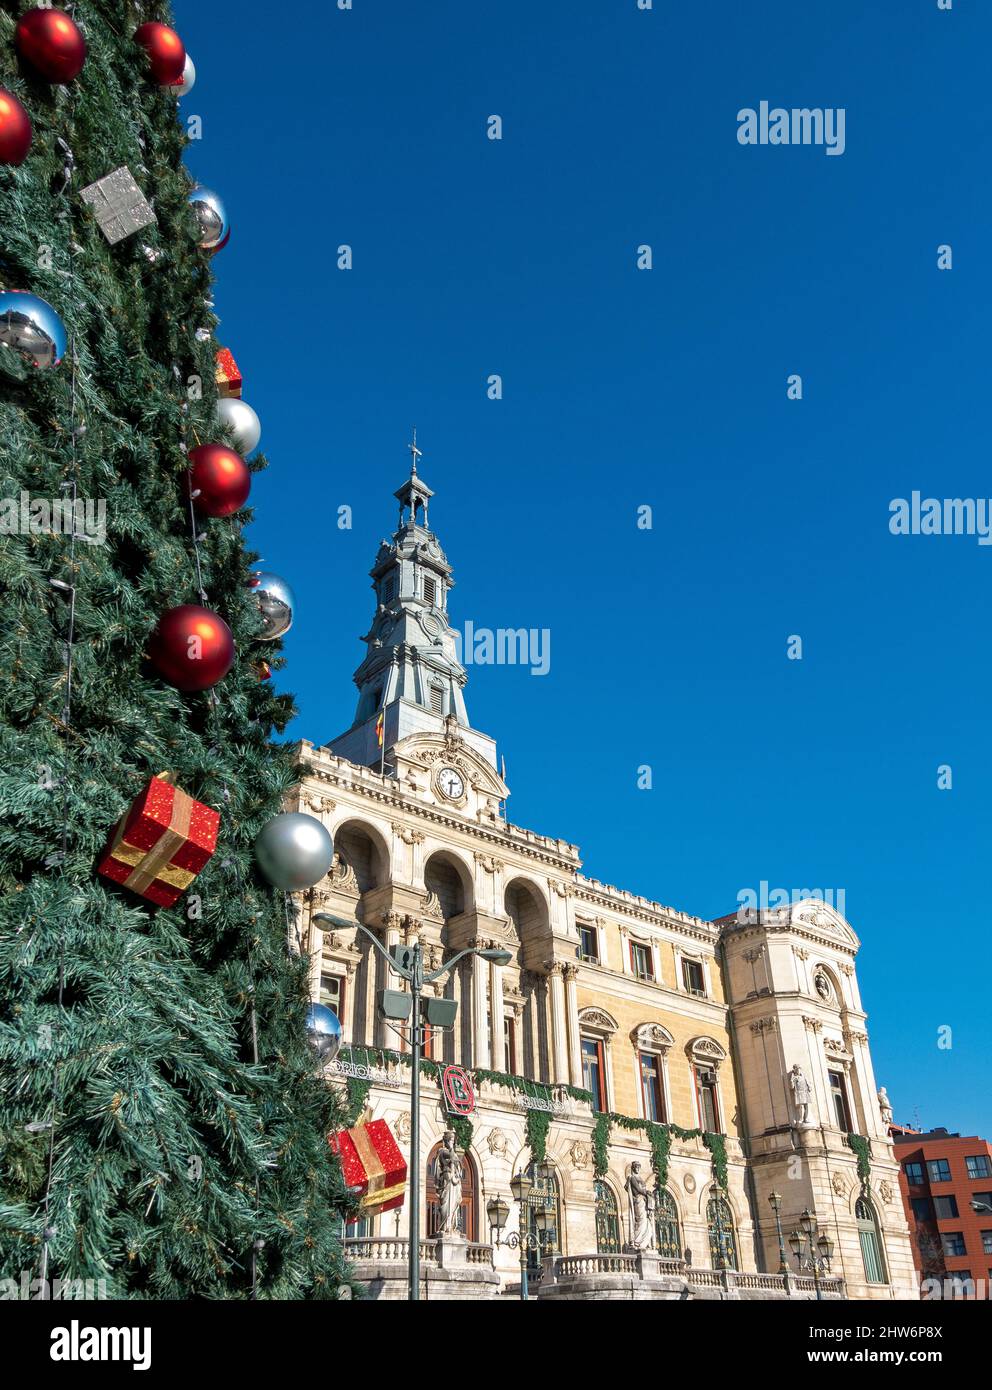 Christmas tree displayed outside the town hall in Bilbao, Basque Country, Spain Stock Photo